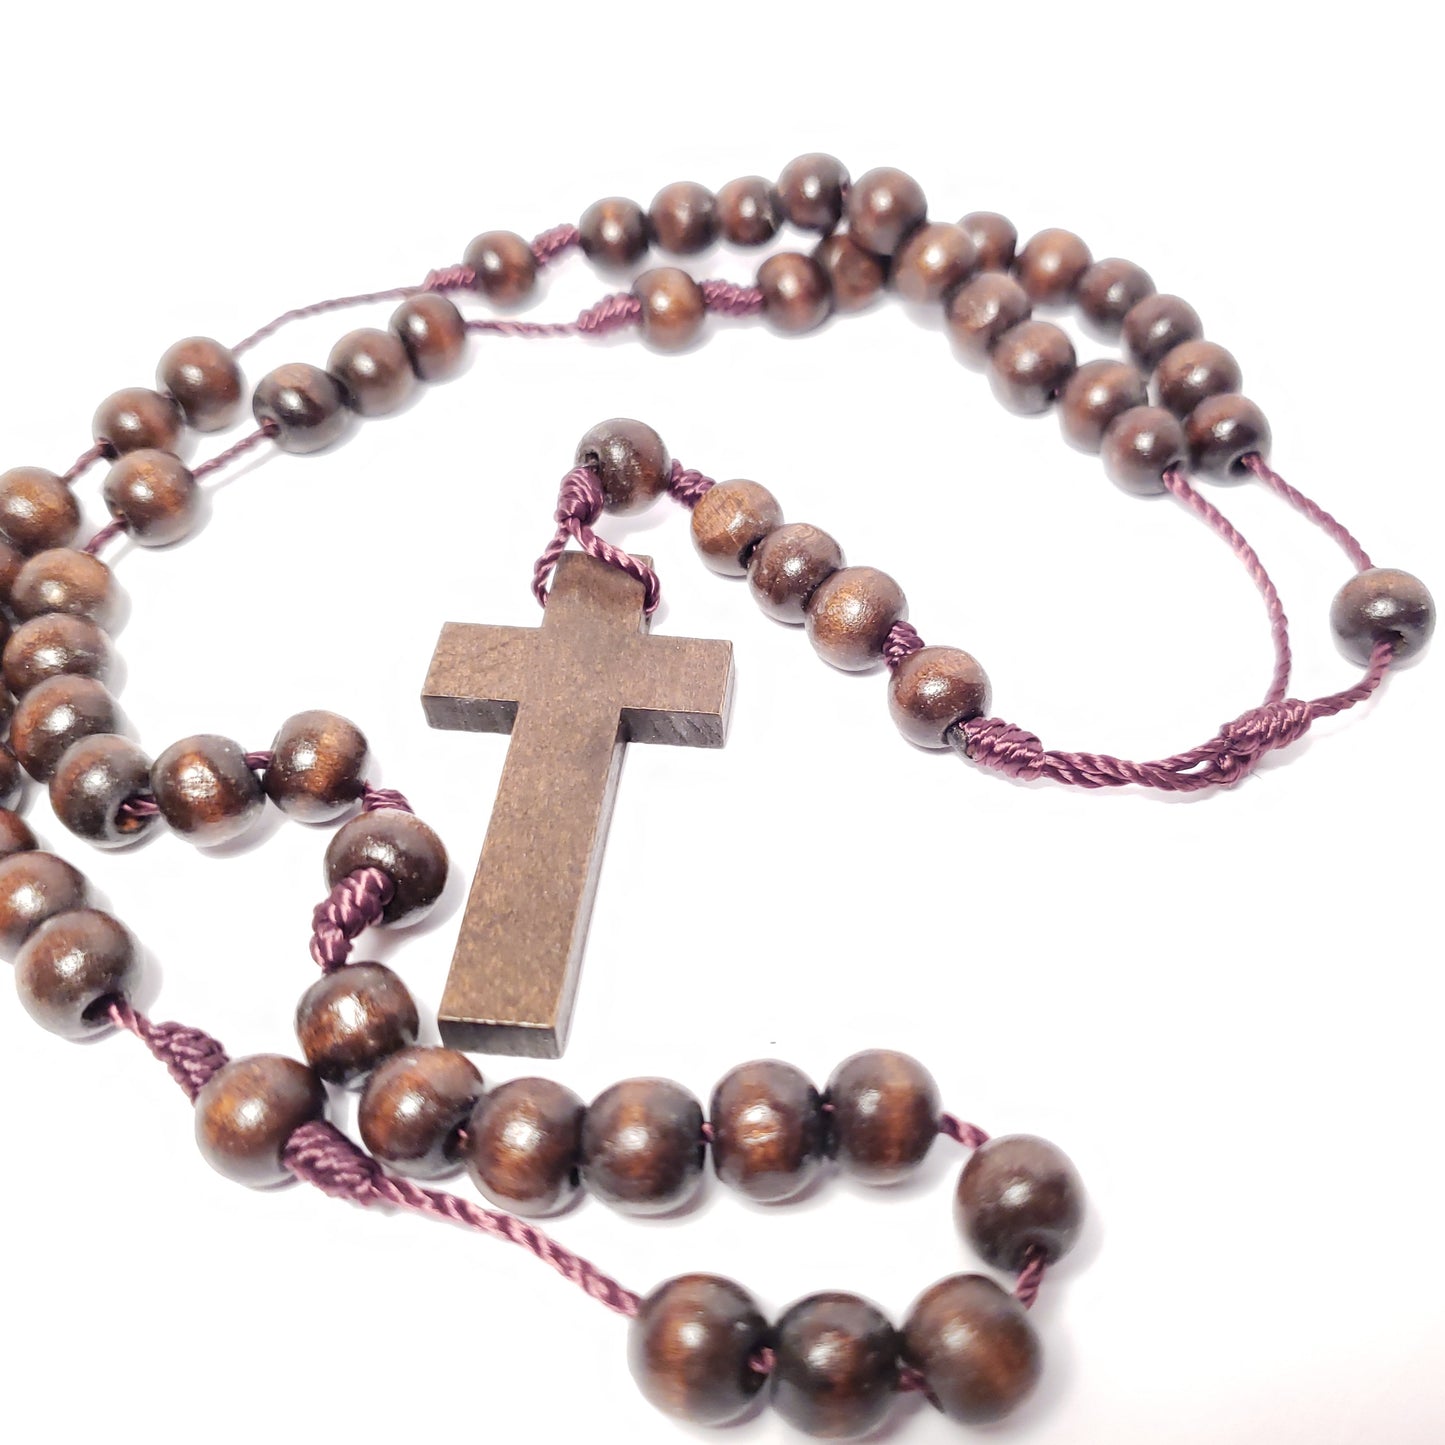 Saint Charbel & Jesus wood rosary - Our Lady of Gifts 